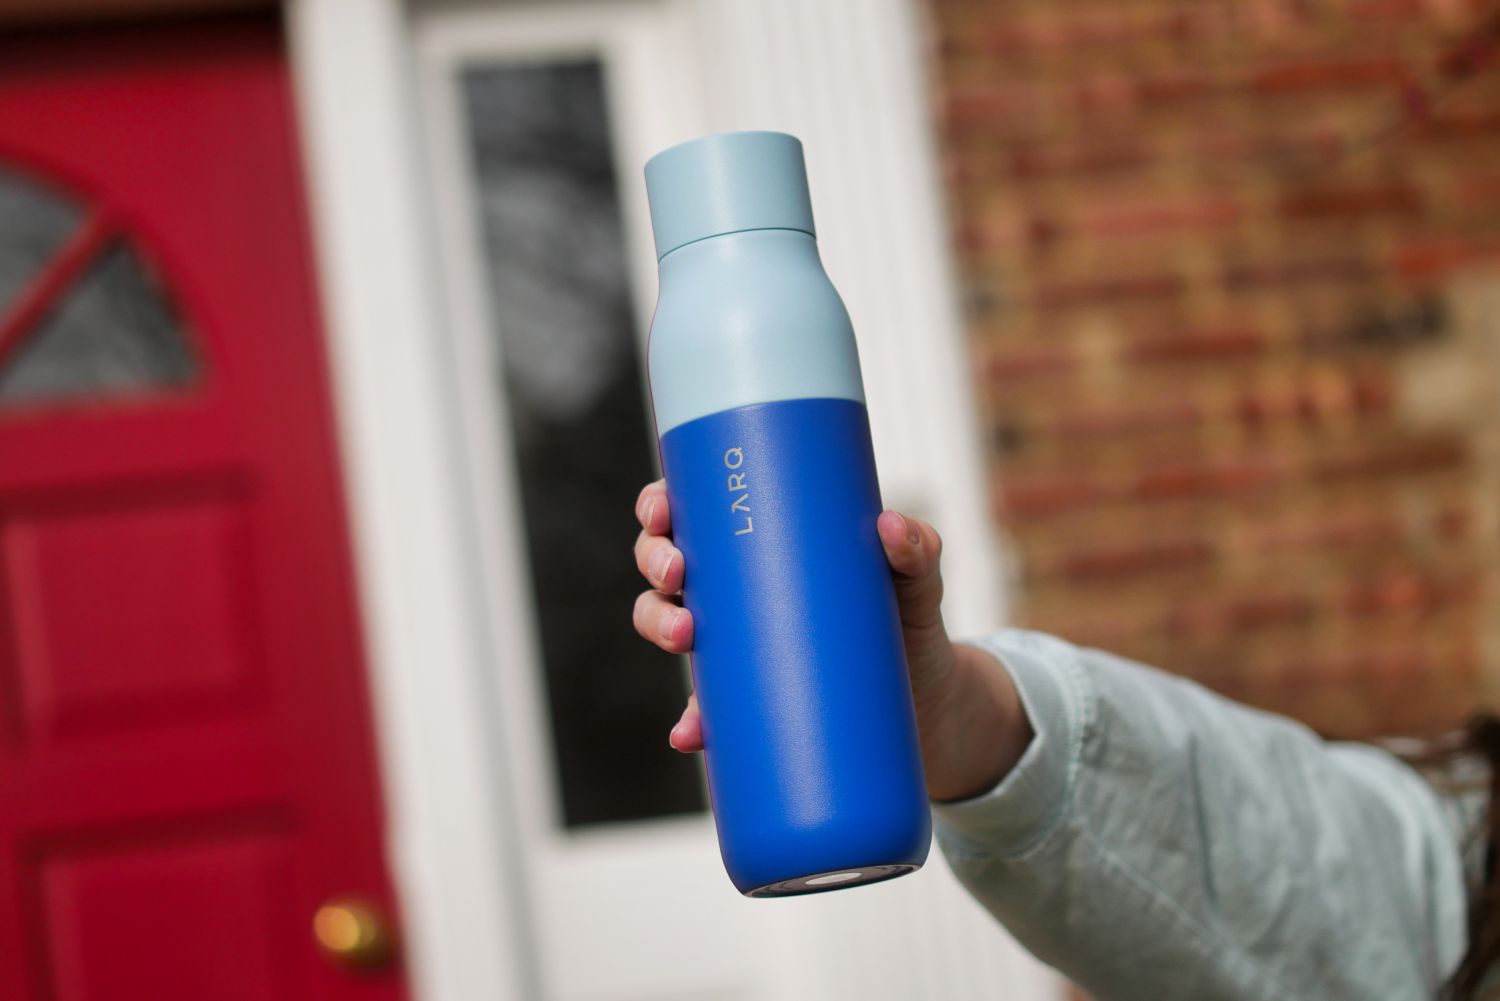 Larq Self Cleaning Water Bottle Review